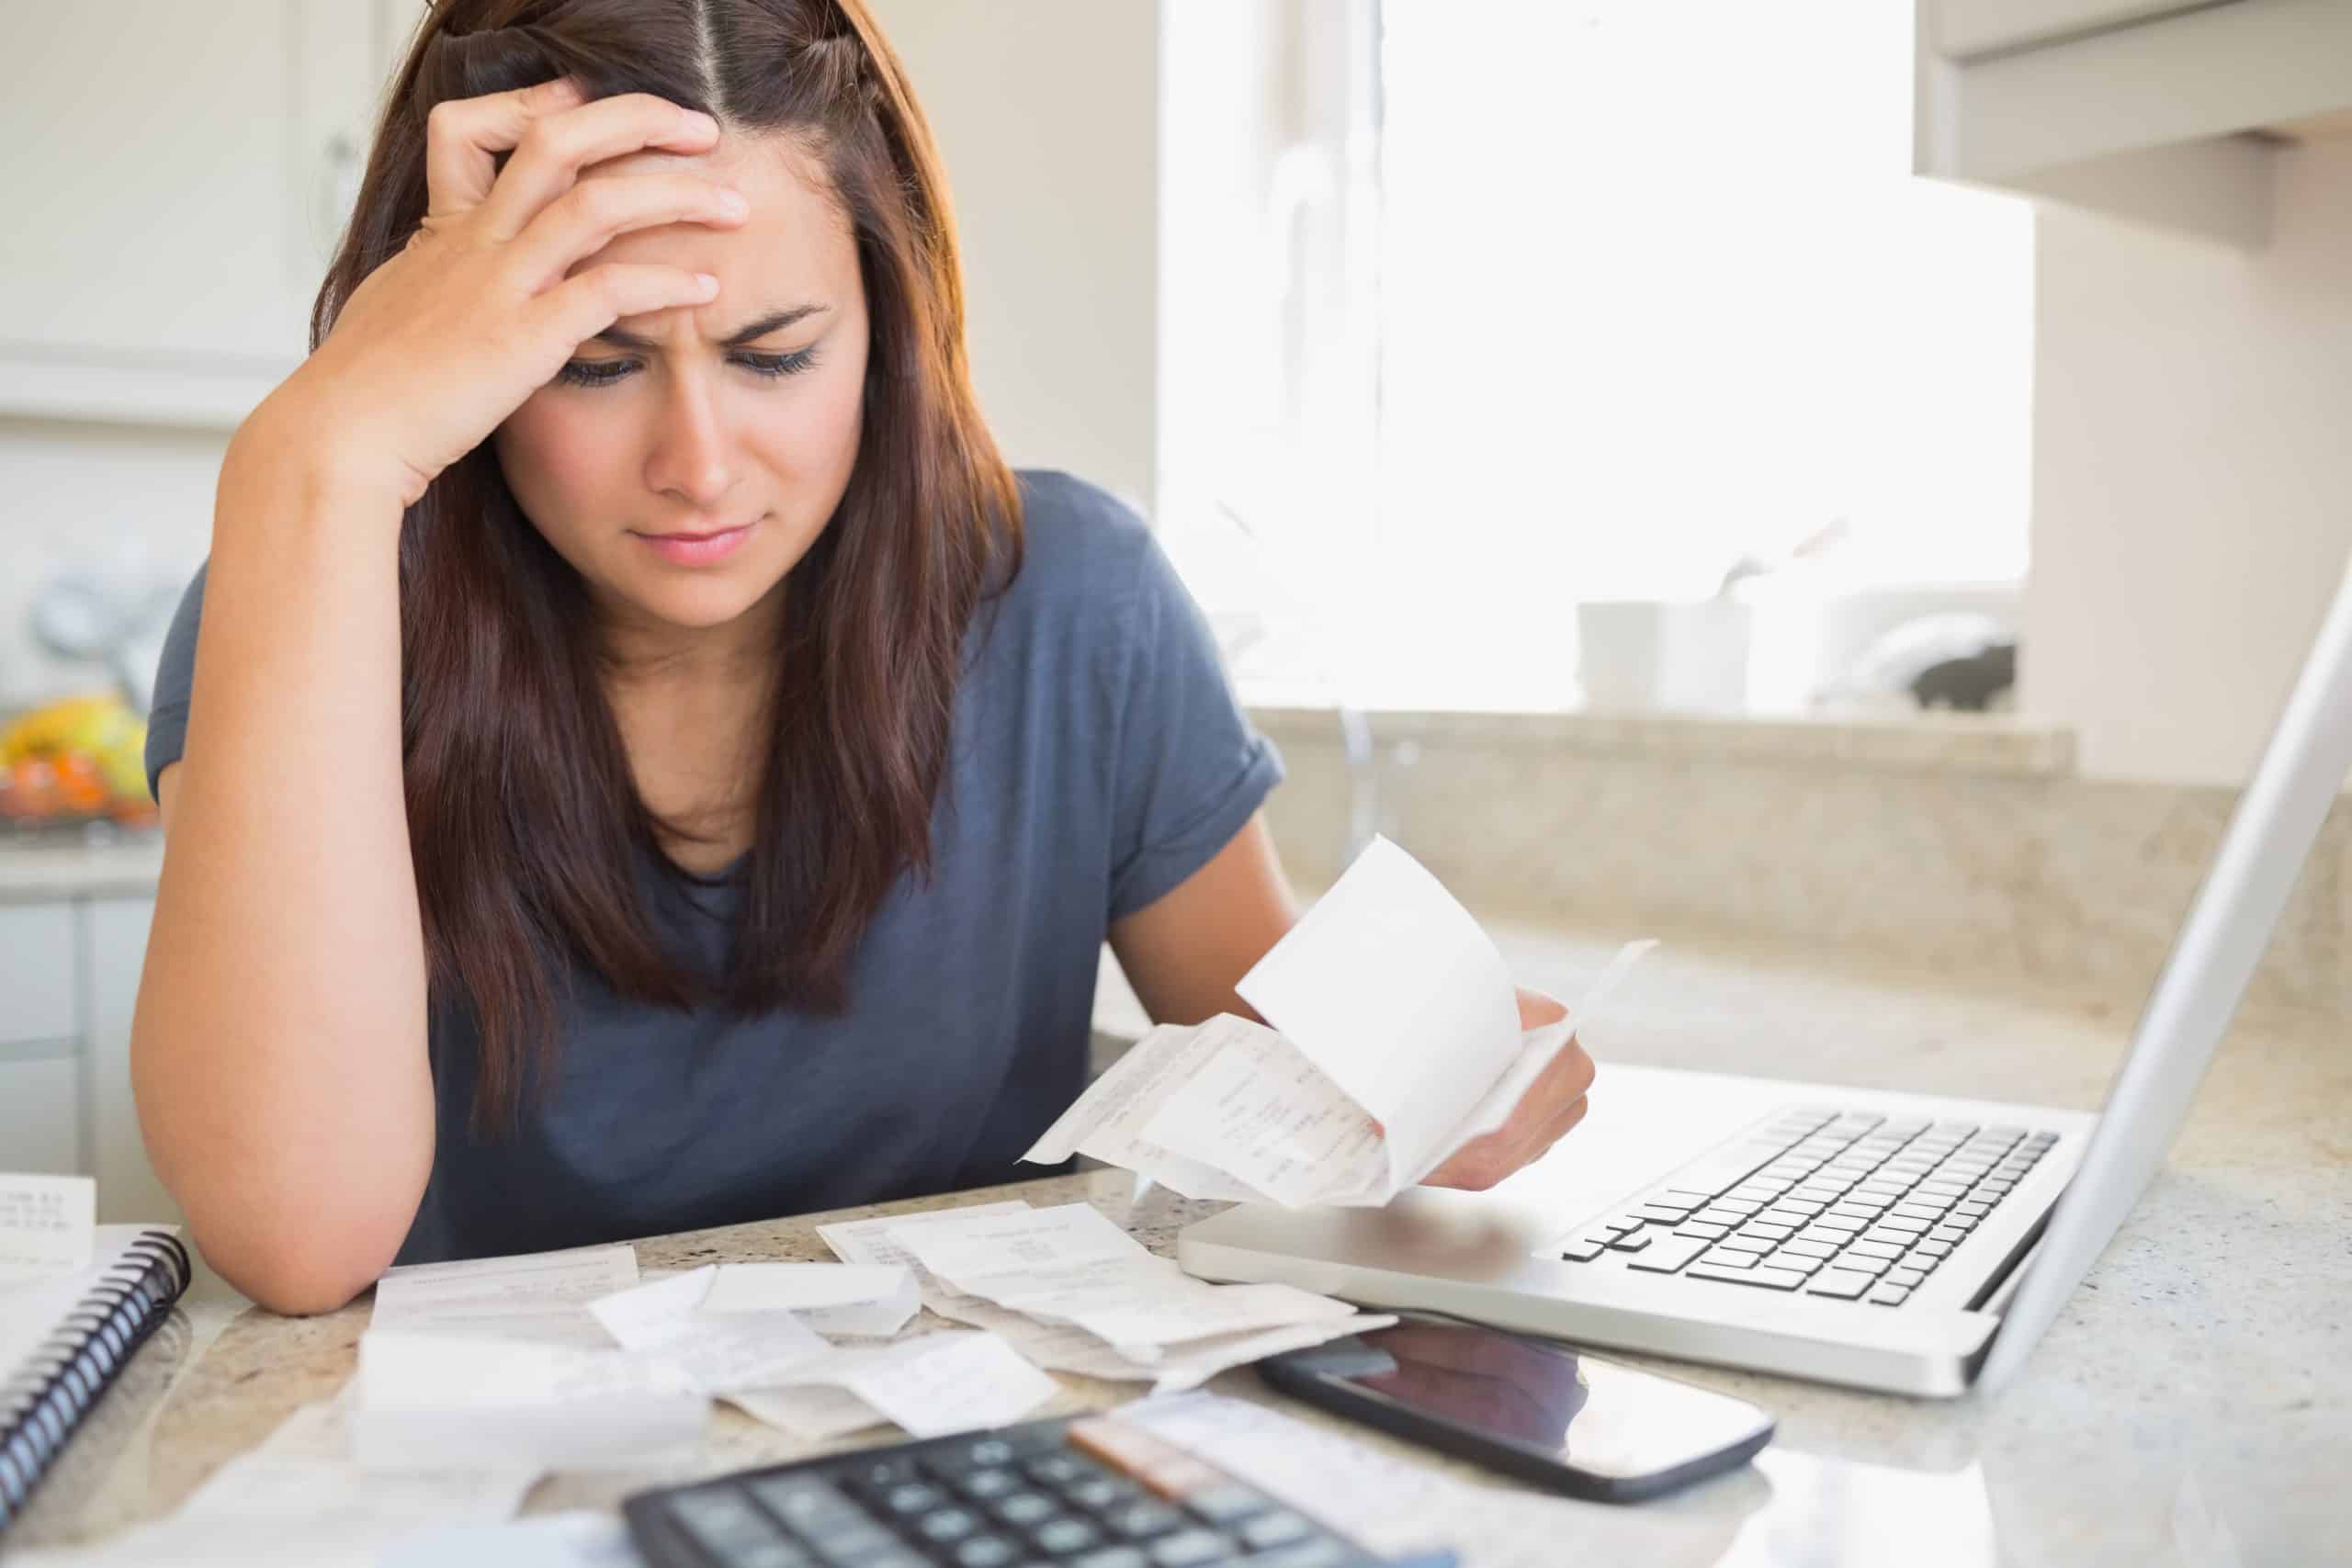 How to build an emergency fund - Brunette looking worried over bills in kitchen